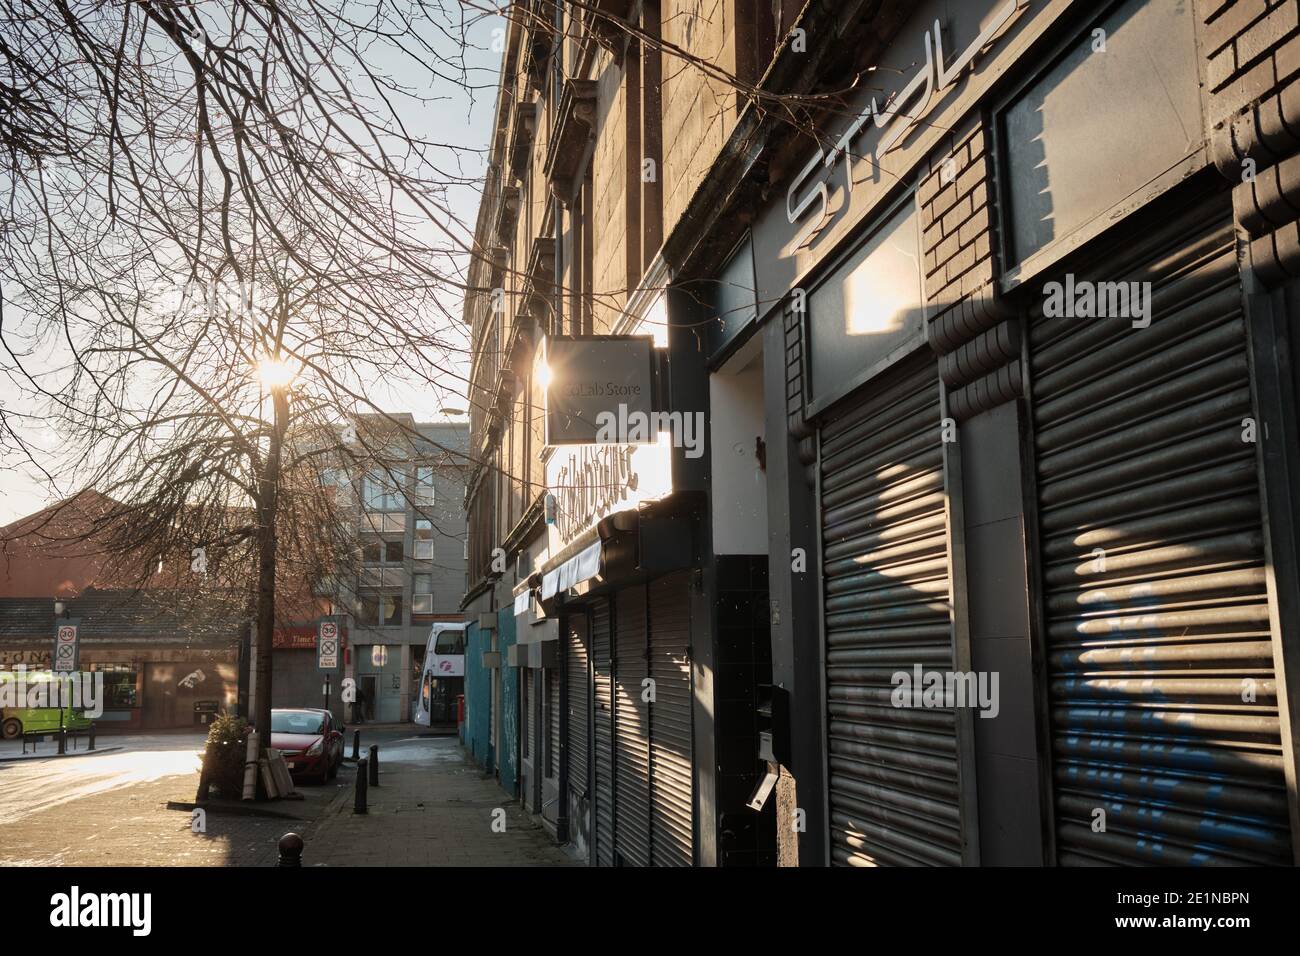 Dowanhill Street, Partick. Shops with shutters down. Glasgow. January 2021. Stock Photo